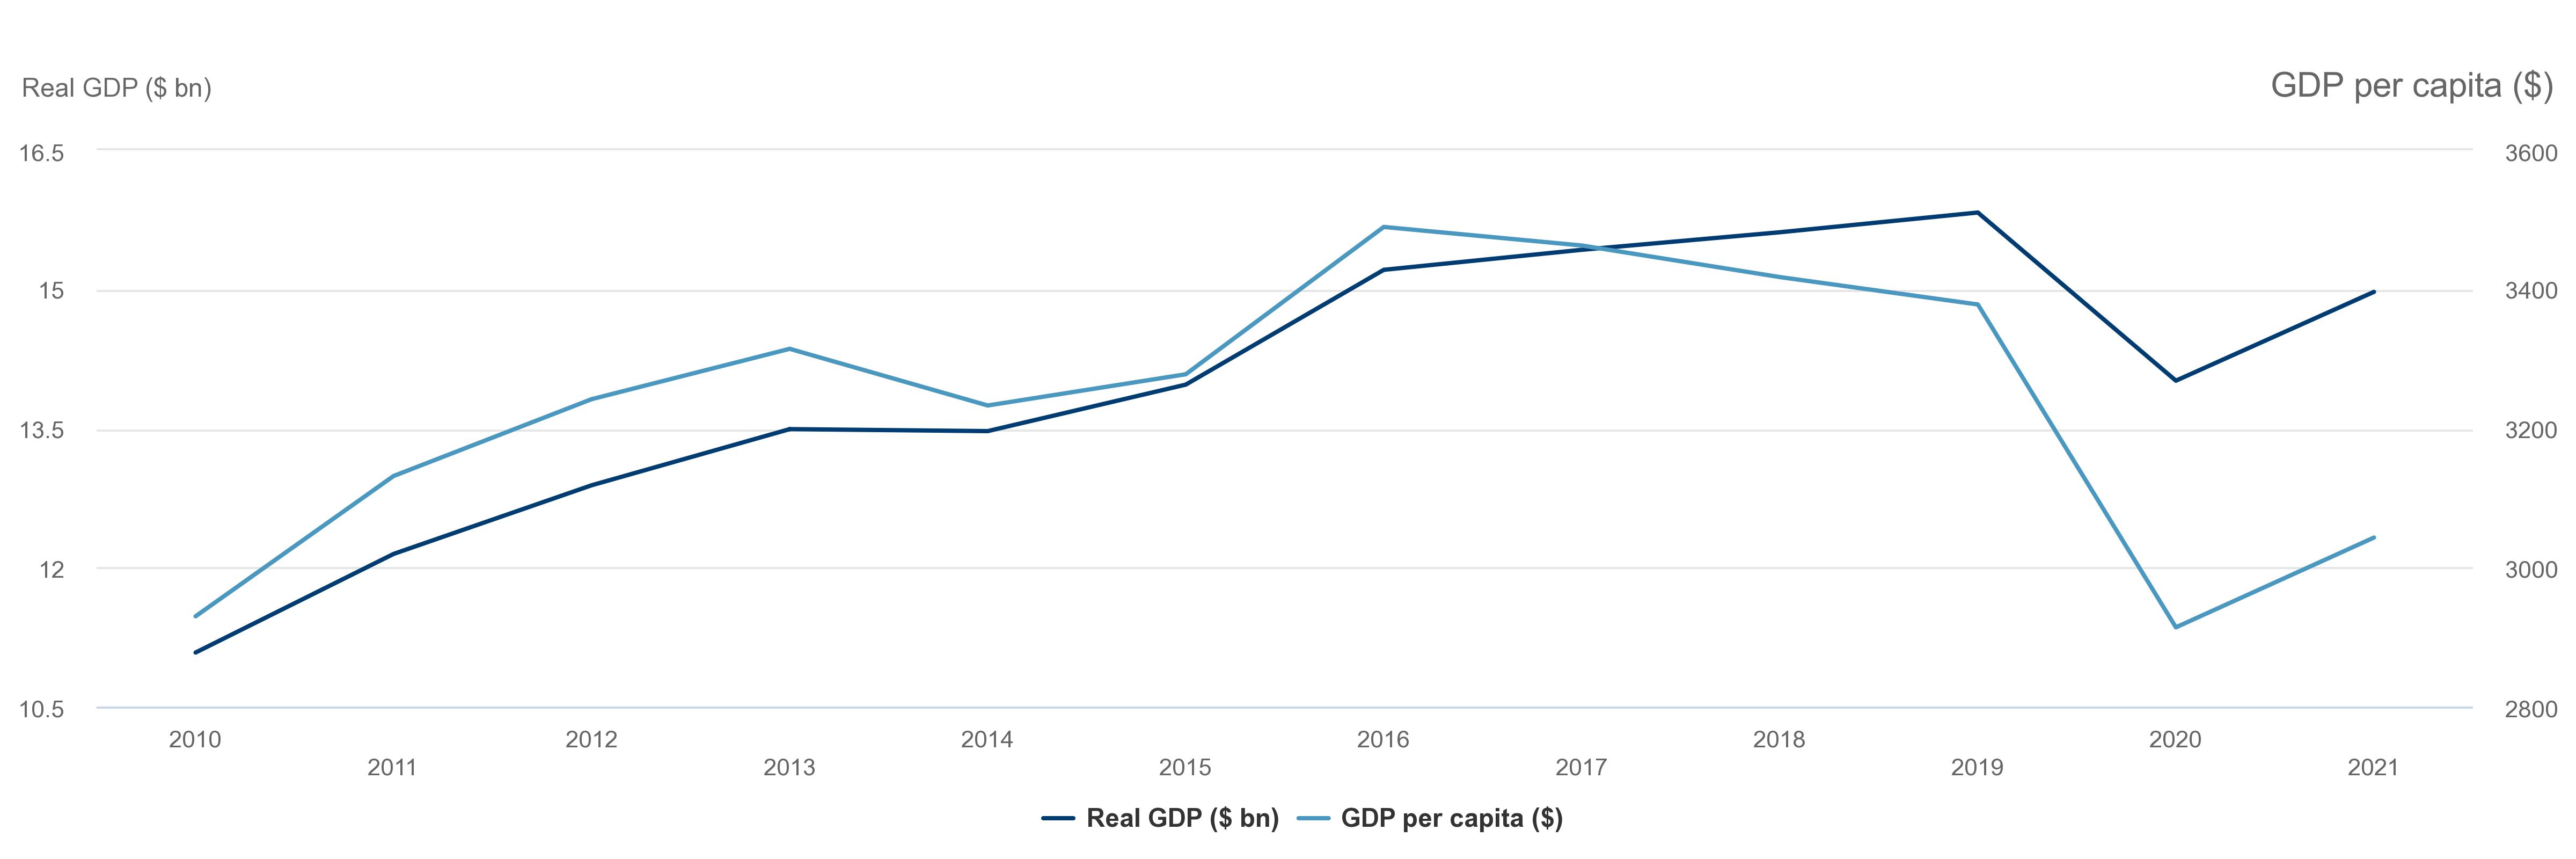 GDP per capita (constant 2015 $) fell to below its 2011 value in 2020, showing a faltering Palestinian economy